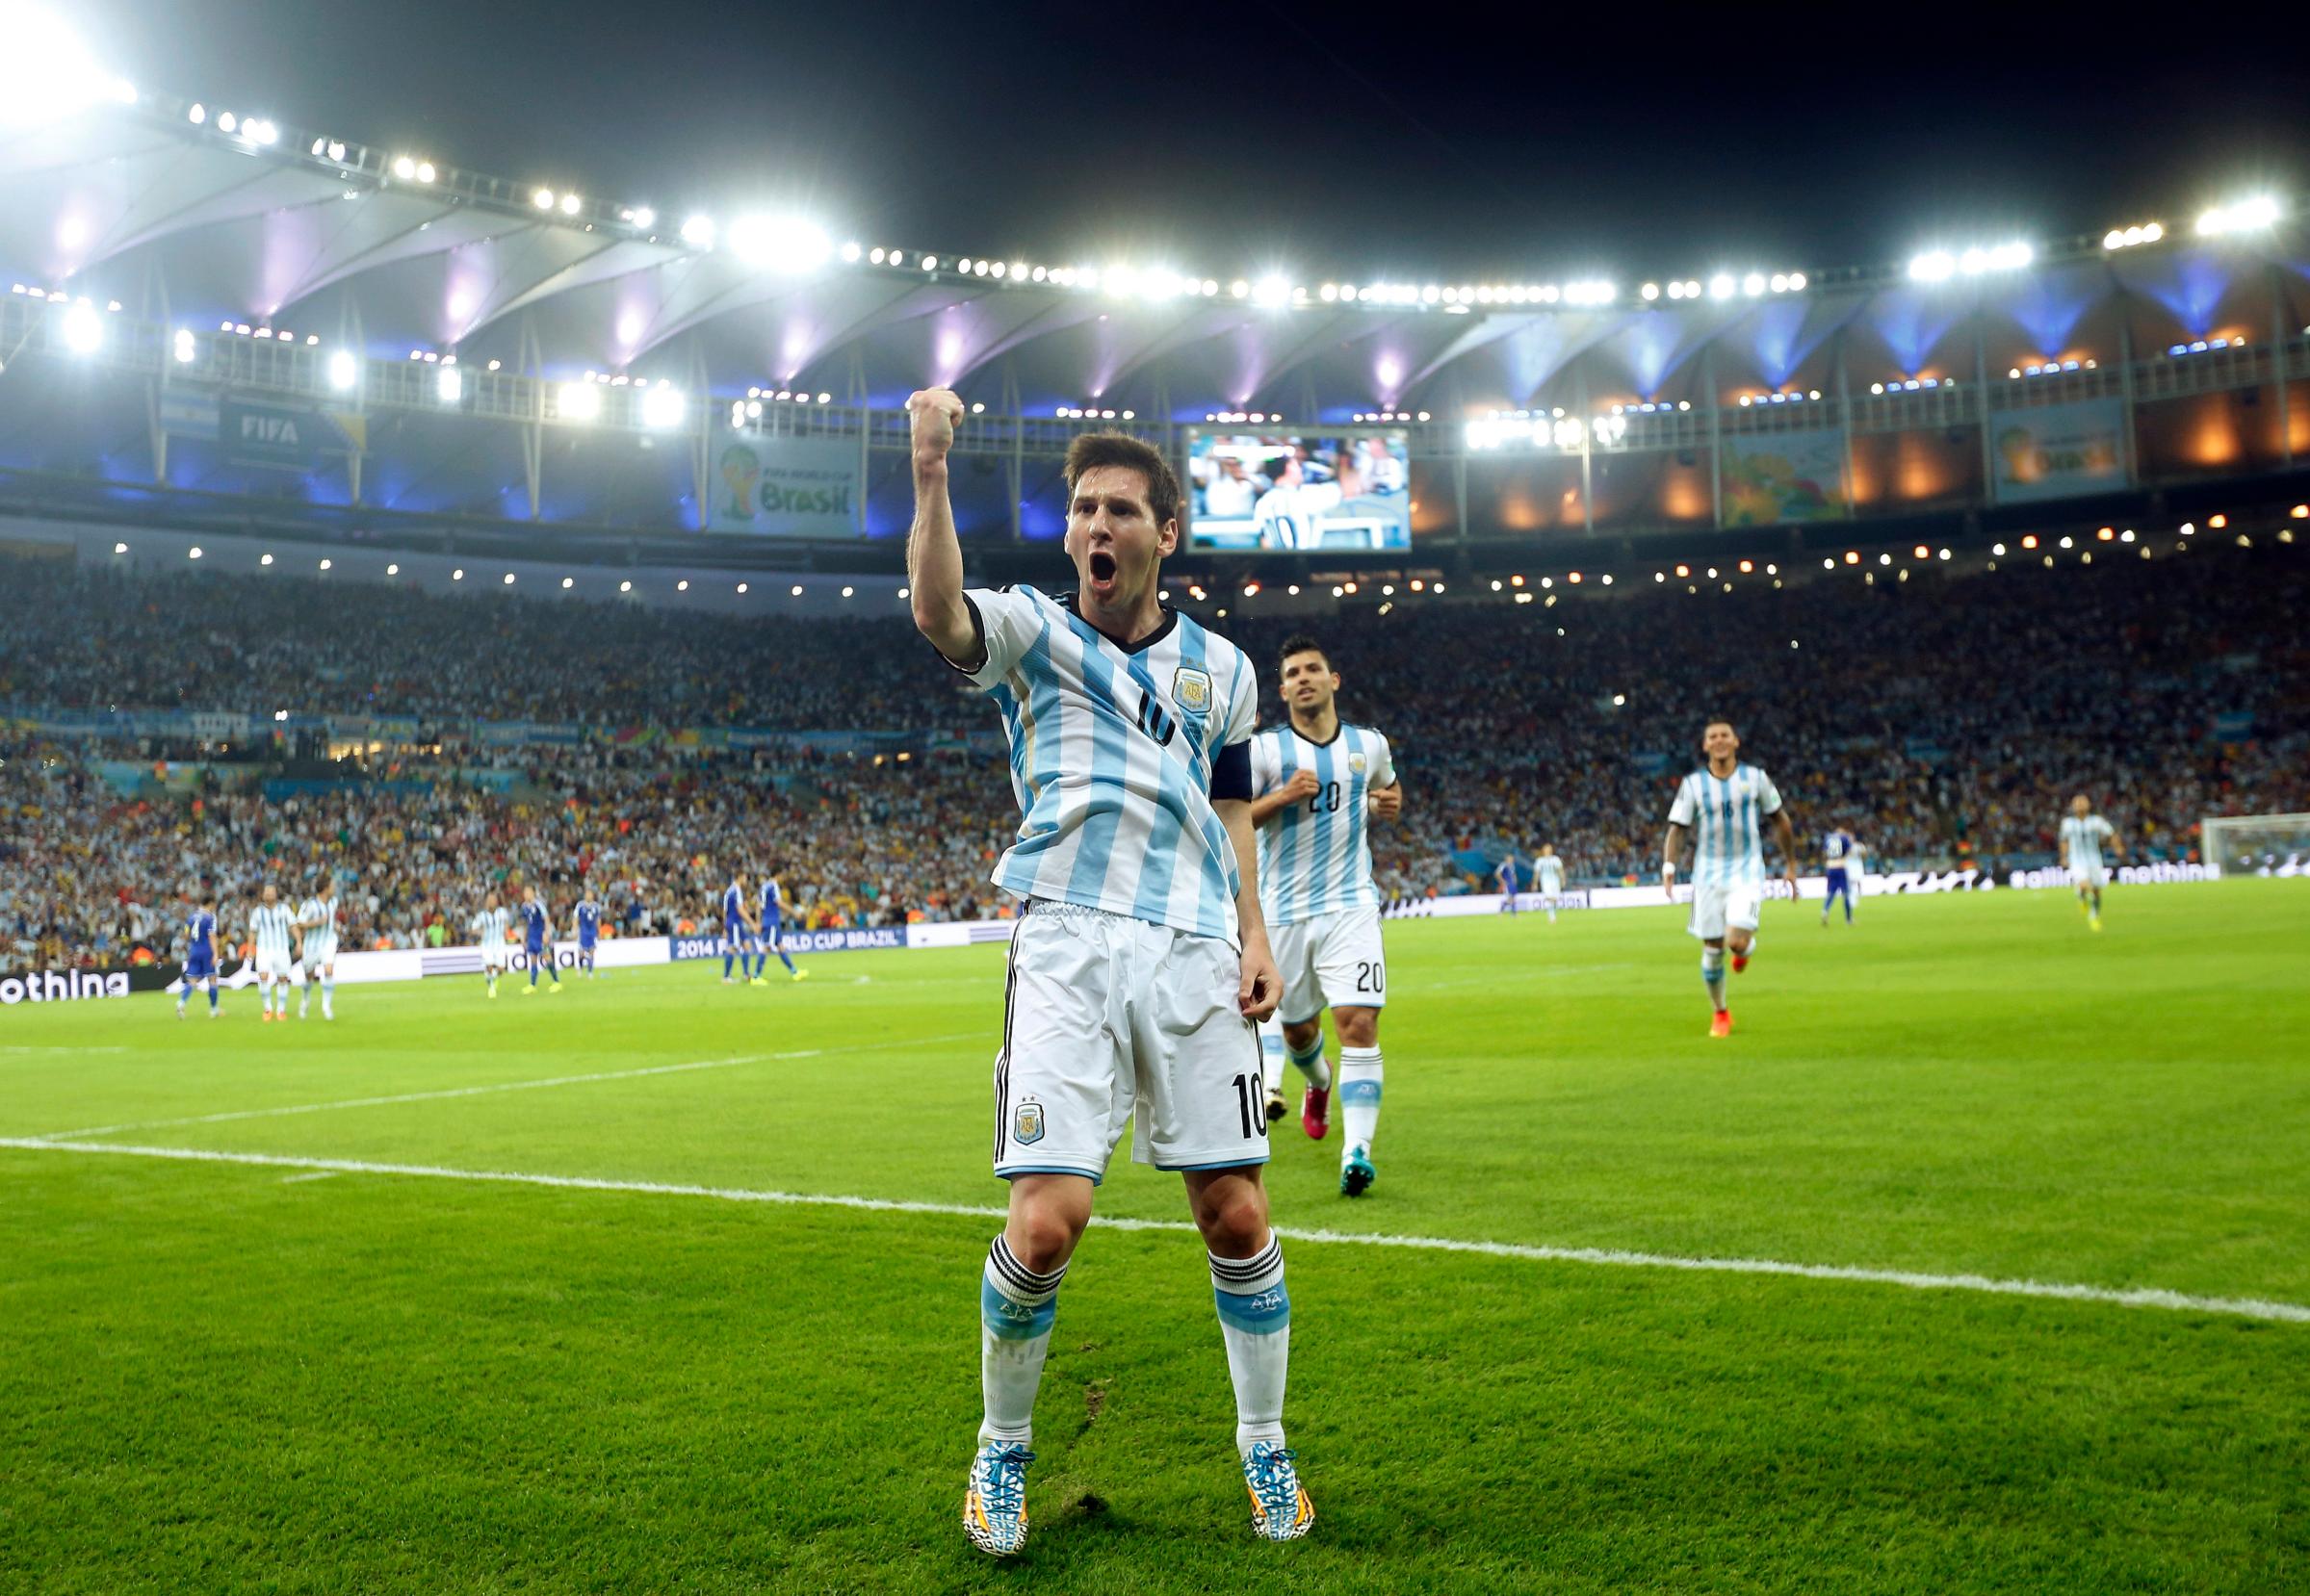 Argentina's Lionel Messi celebrates scoring his side's second goal during the group F World Cup soccer match between Argentina and Bosnia at the Maracana Stadium in Rio de Janeiro, Brazil, on June 15, 2014.